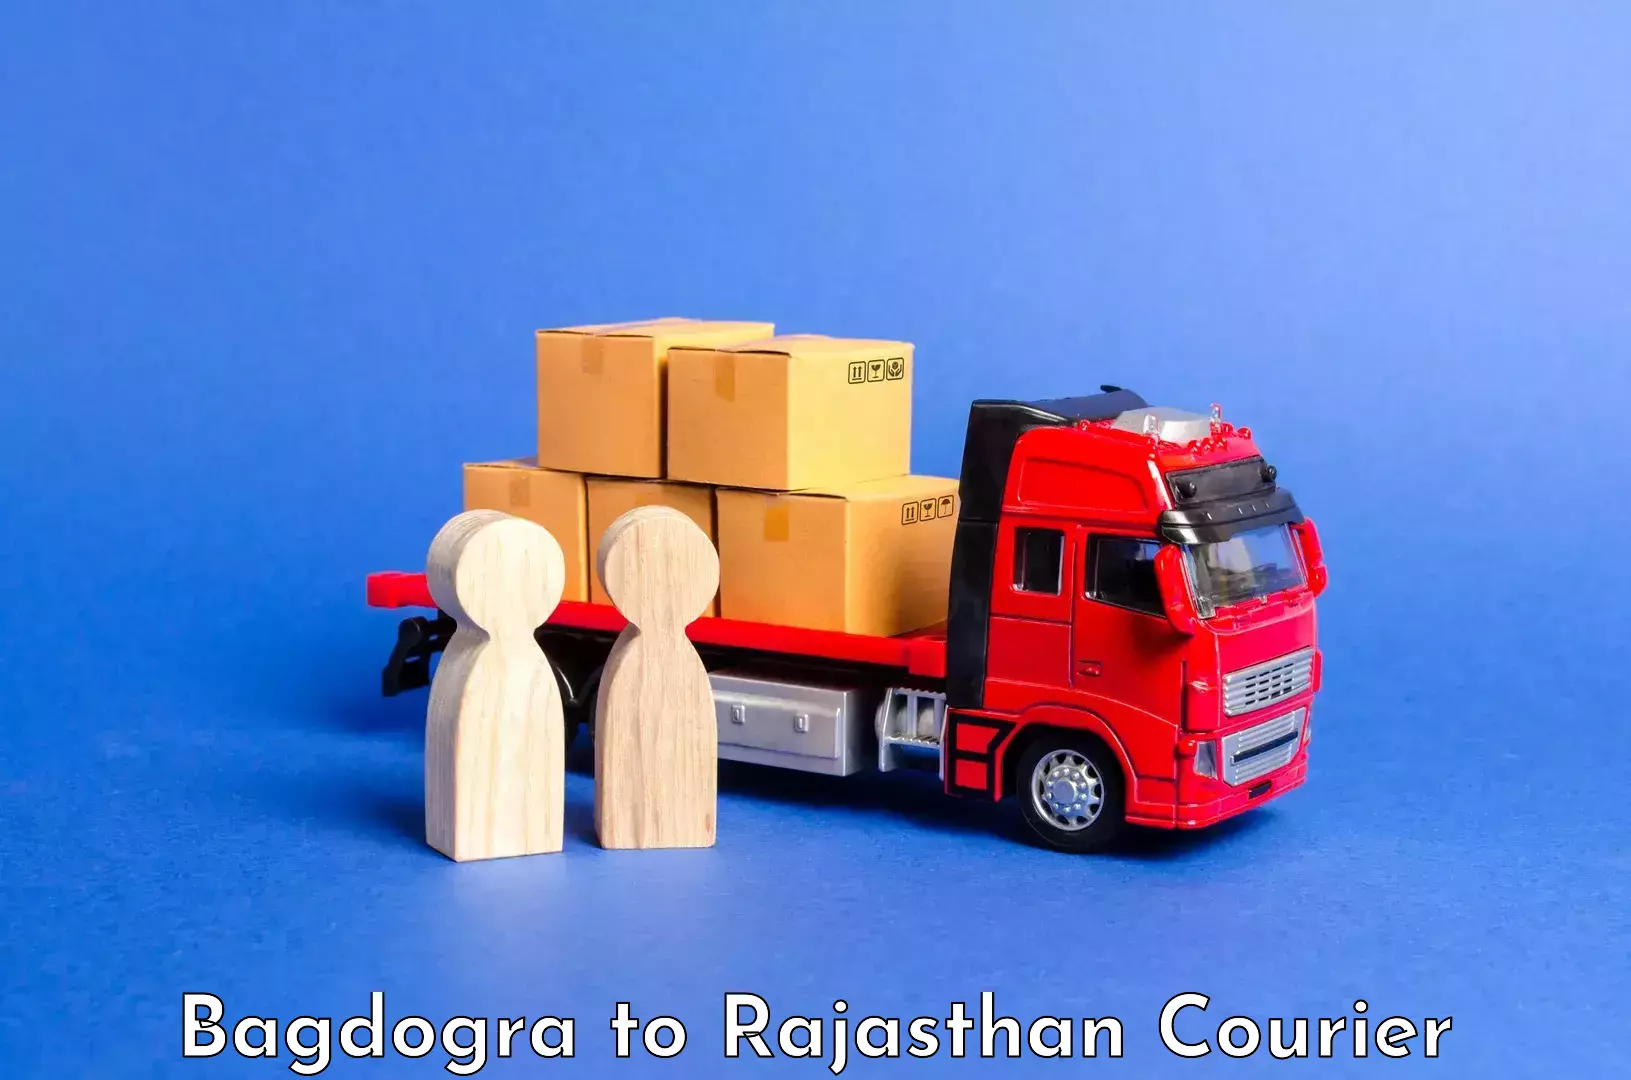 Baggage shipping experience in Bagdogra to Laxmangarh